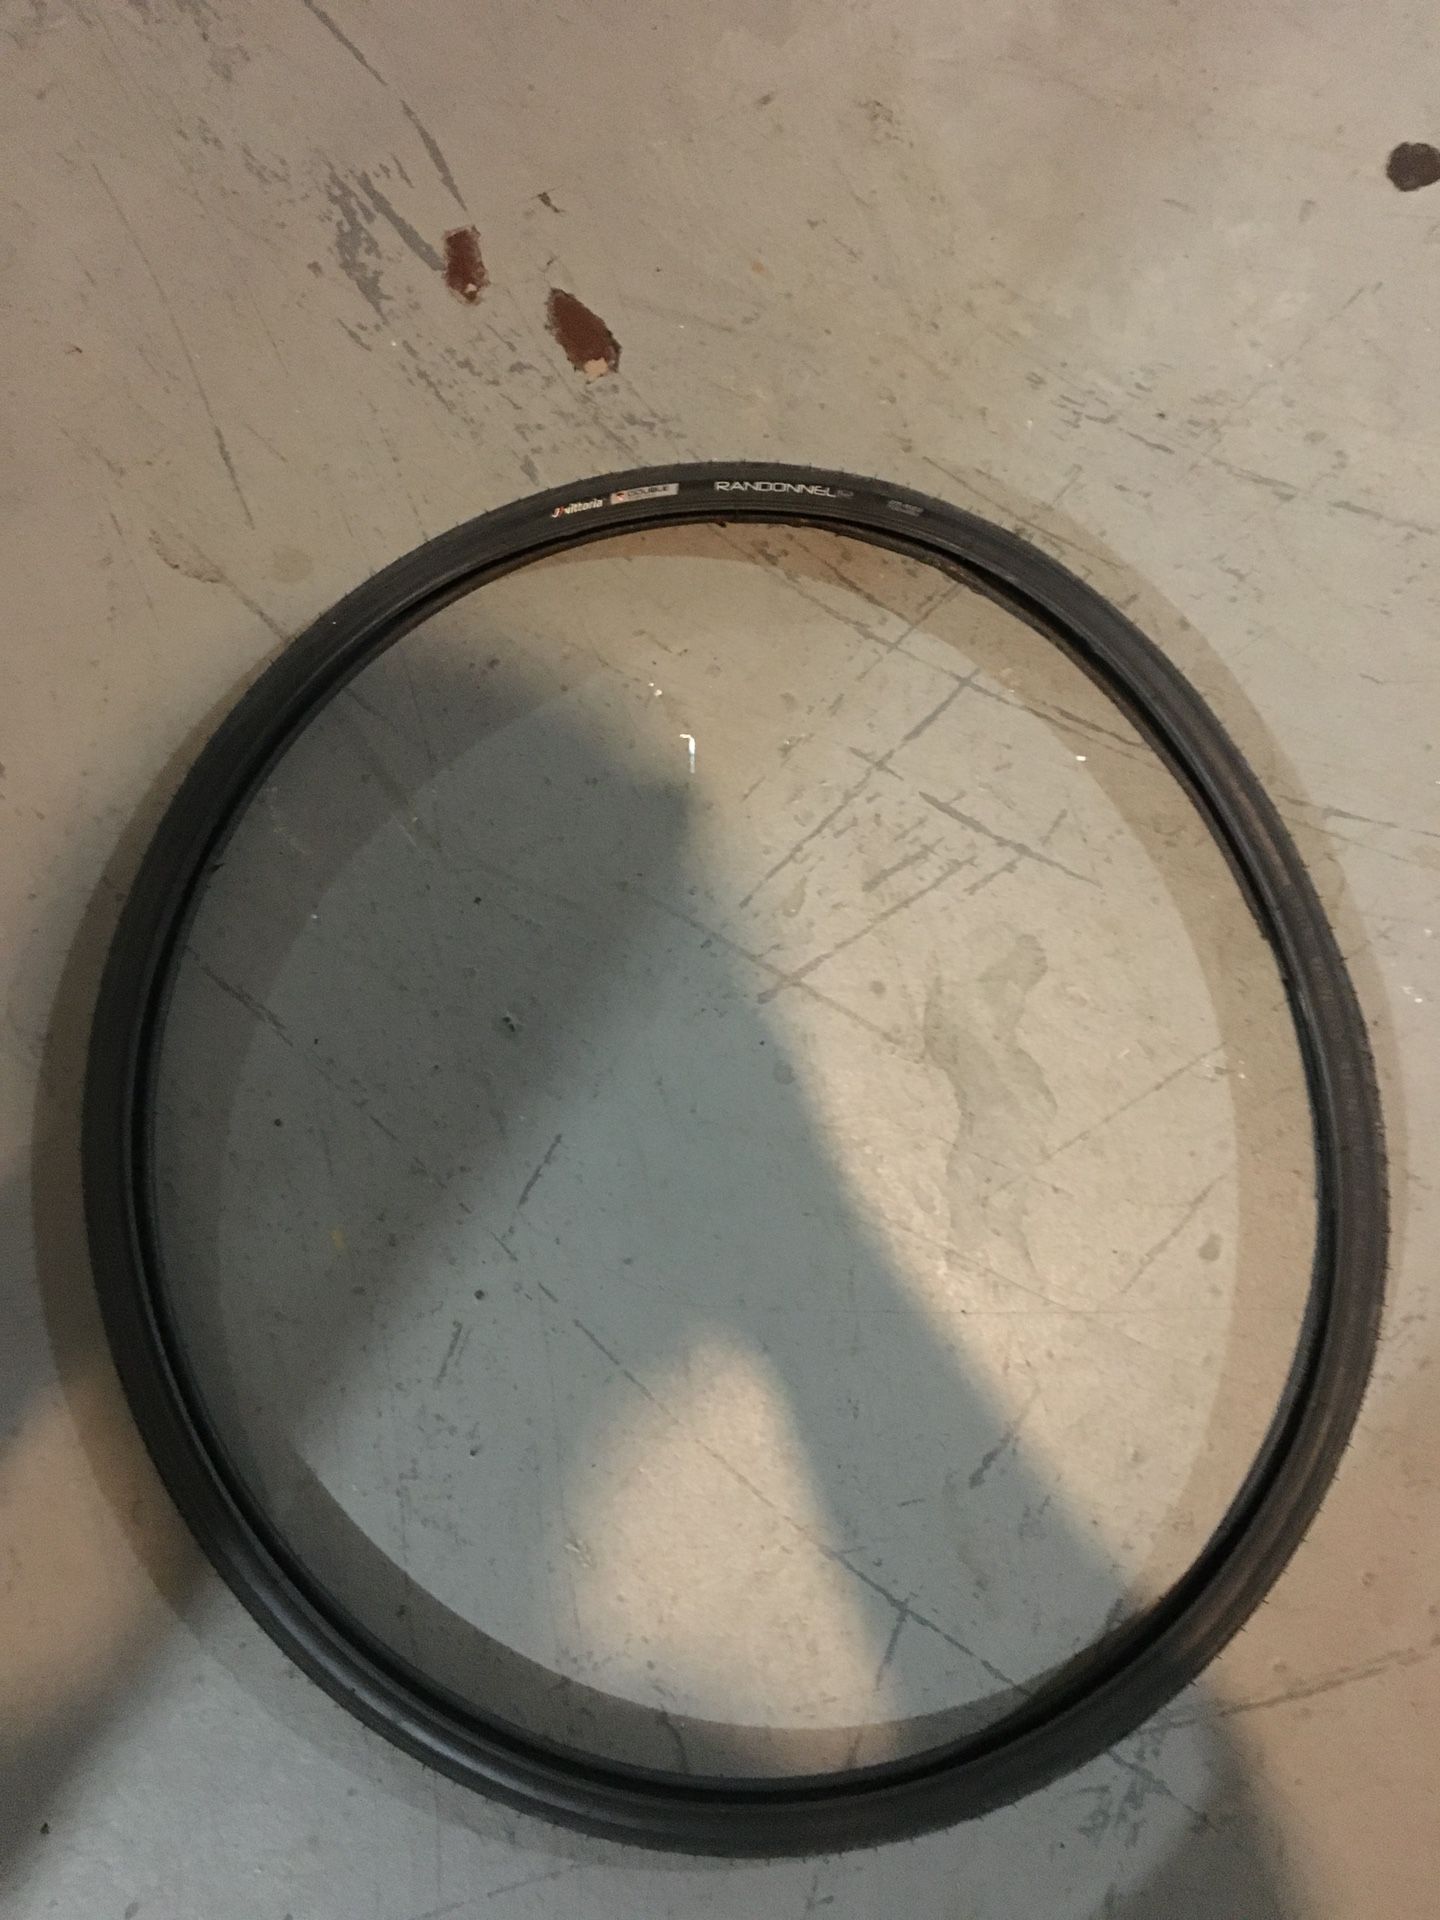 Vittoria Randonneur - 25mm x 700C - Road Bike Tire - Low milege - Good and clean condition - If the listing is up and you can see it, that means the i